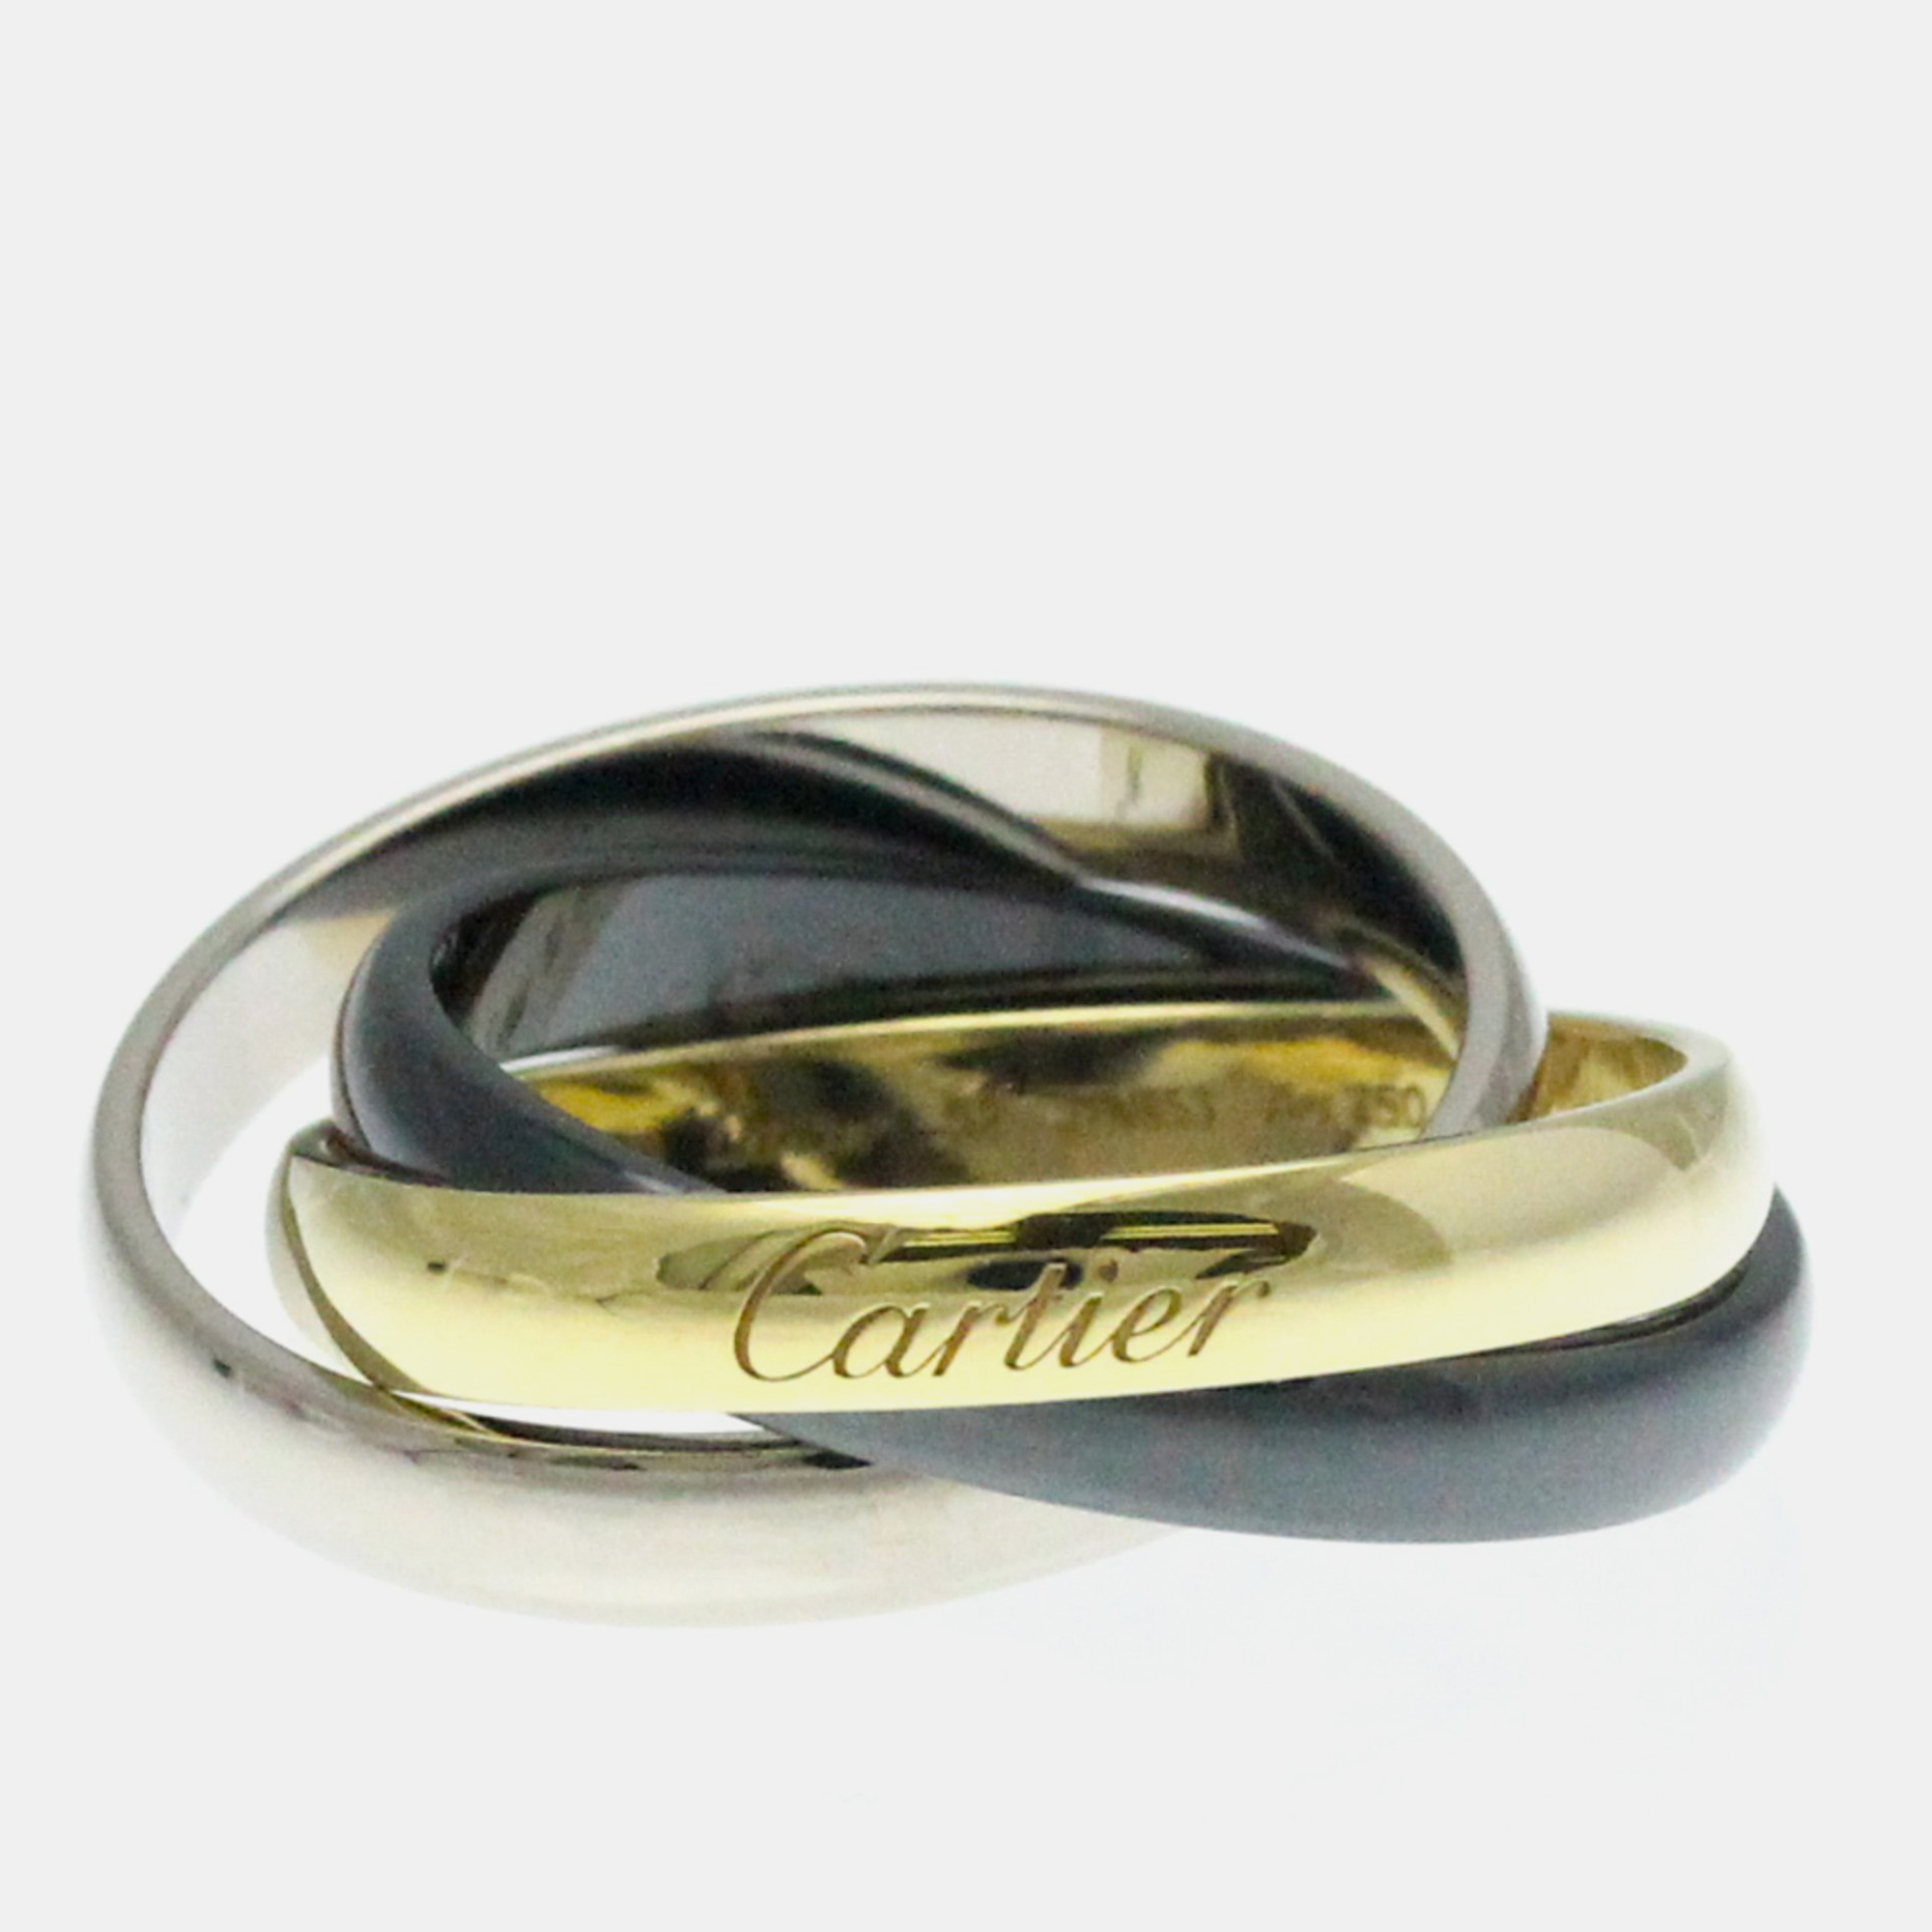 

Cartier 18K Yellow Gold, White Gold and Ceramic Trinity Band Ring EU 52